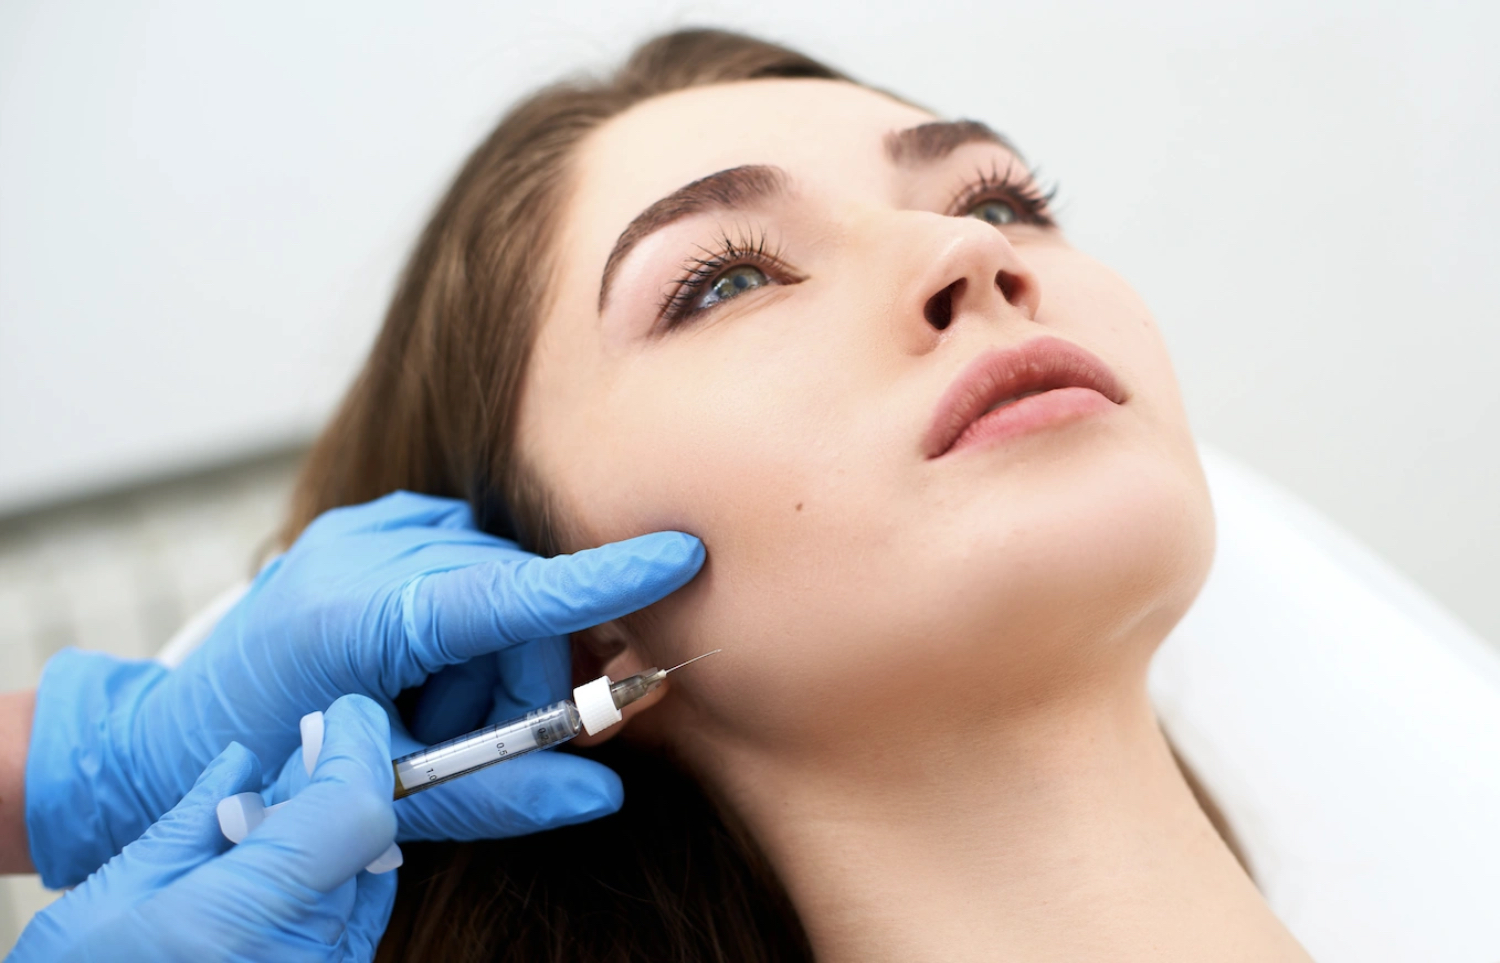 The Many Benefits of Toxin Injections in the Masseter Area